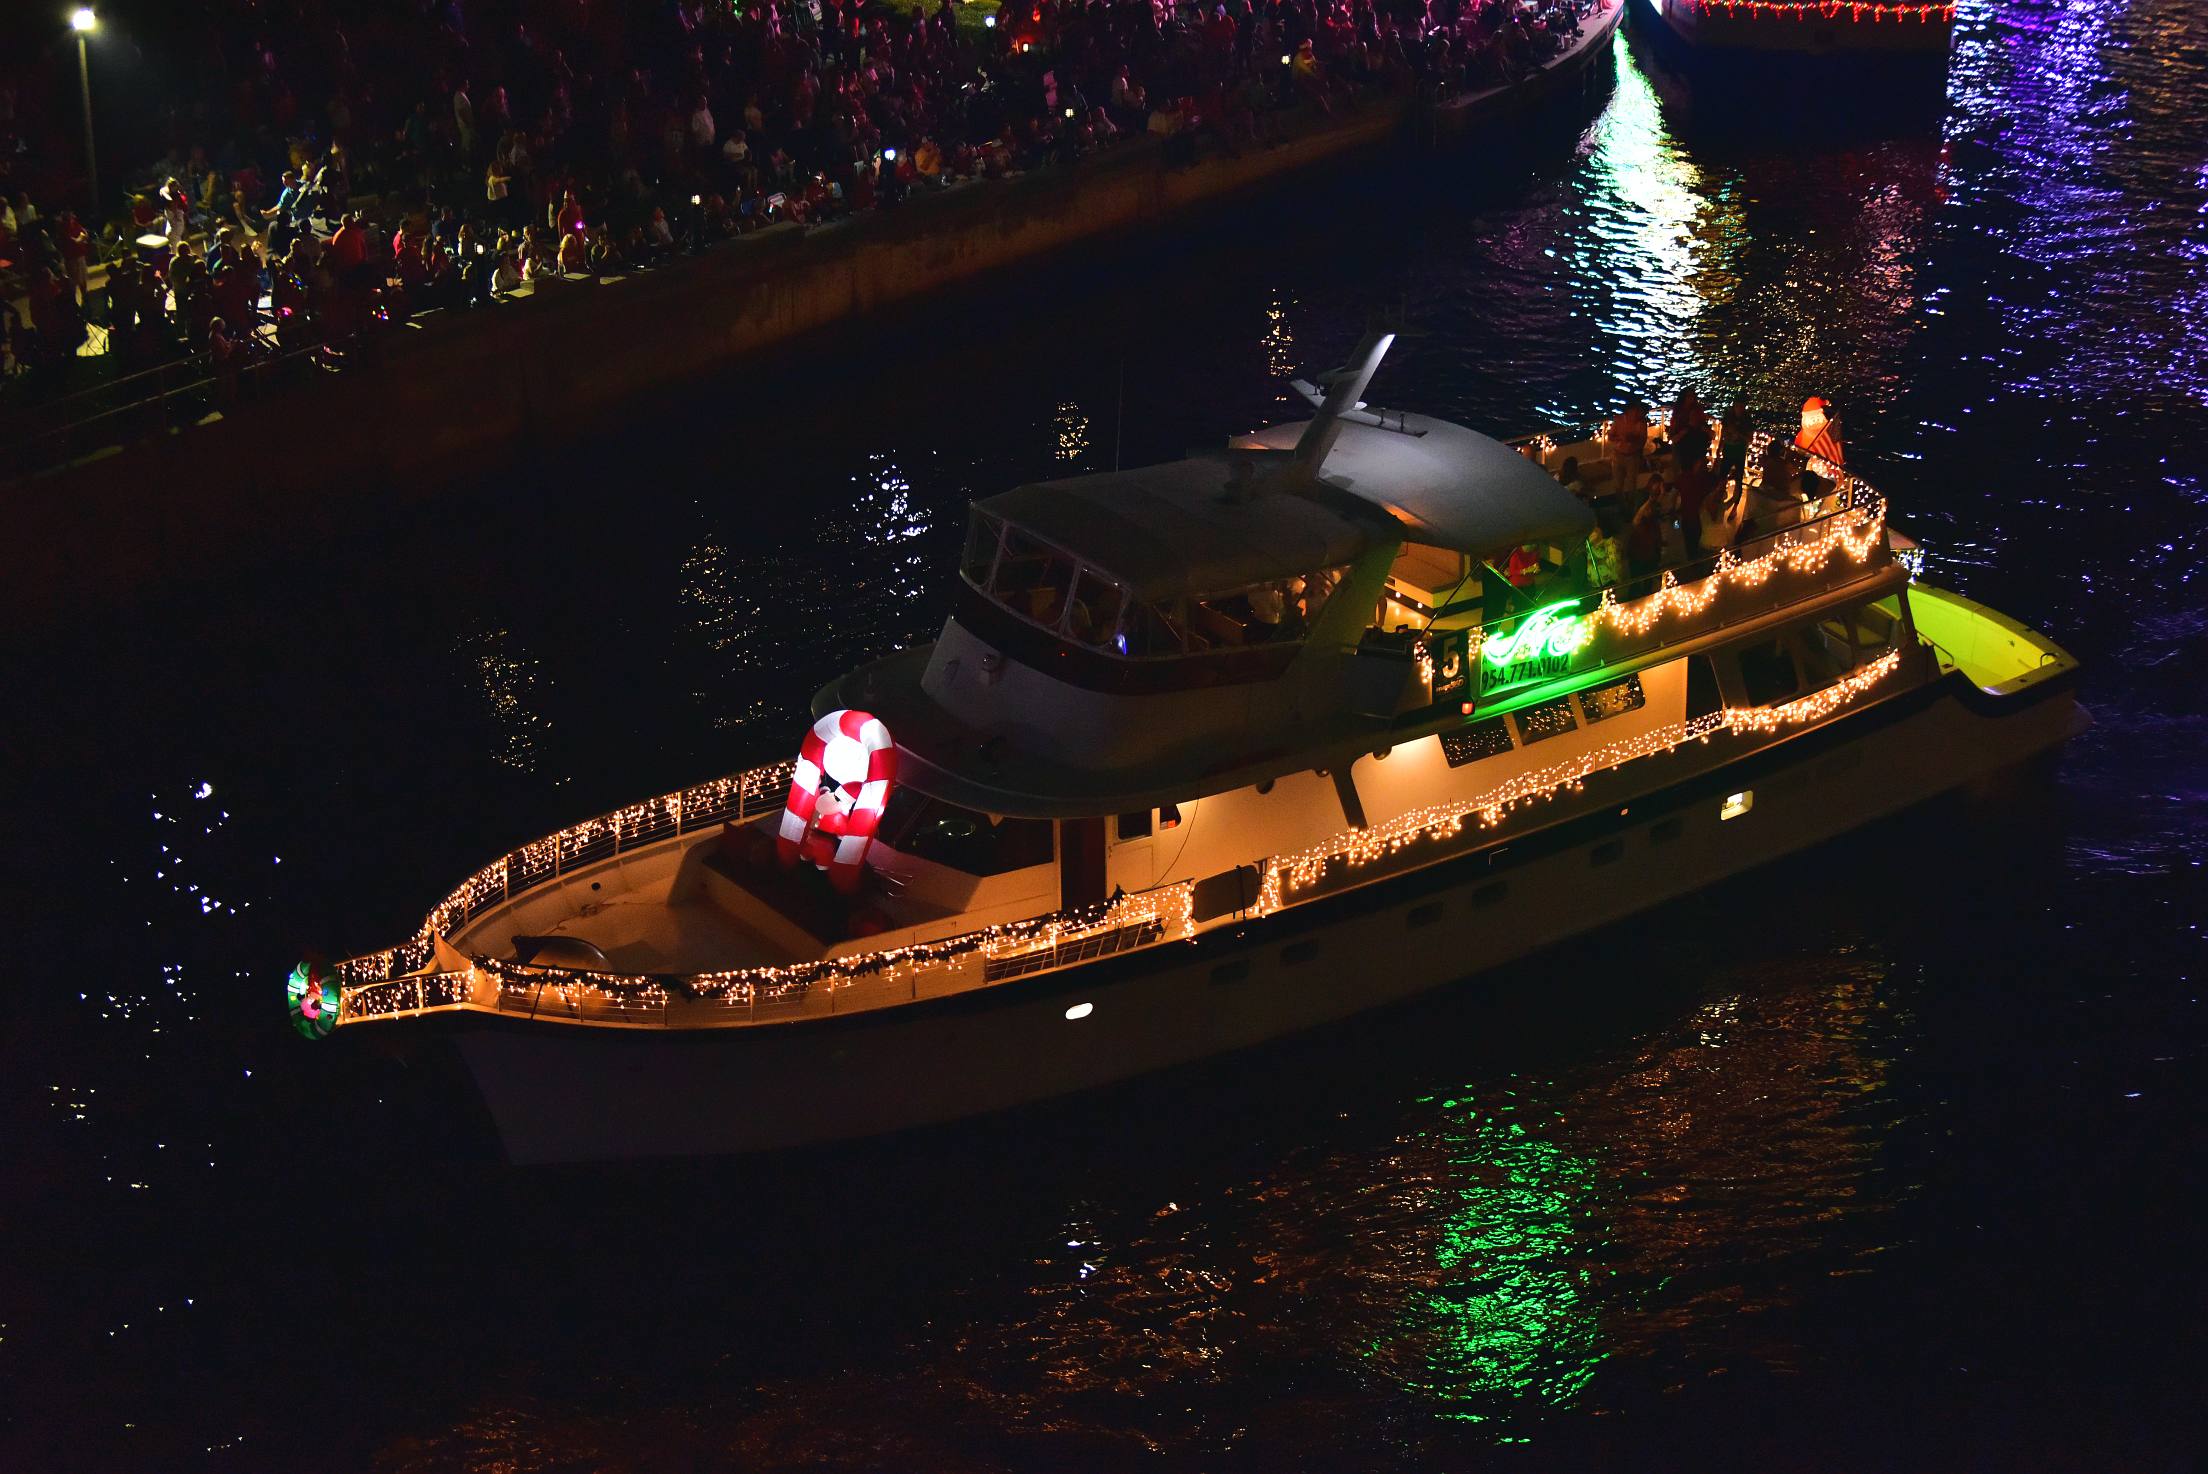 Marine Industries Association on board Summerwind, boat number 5 in the 2021 Winterfest Boat Parade